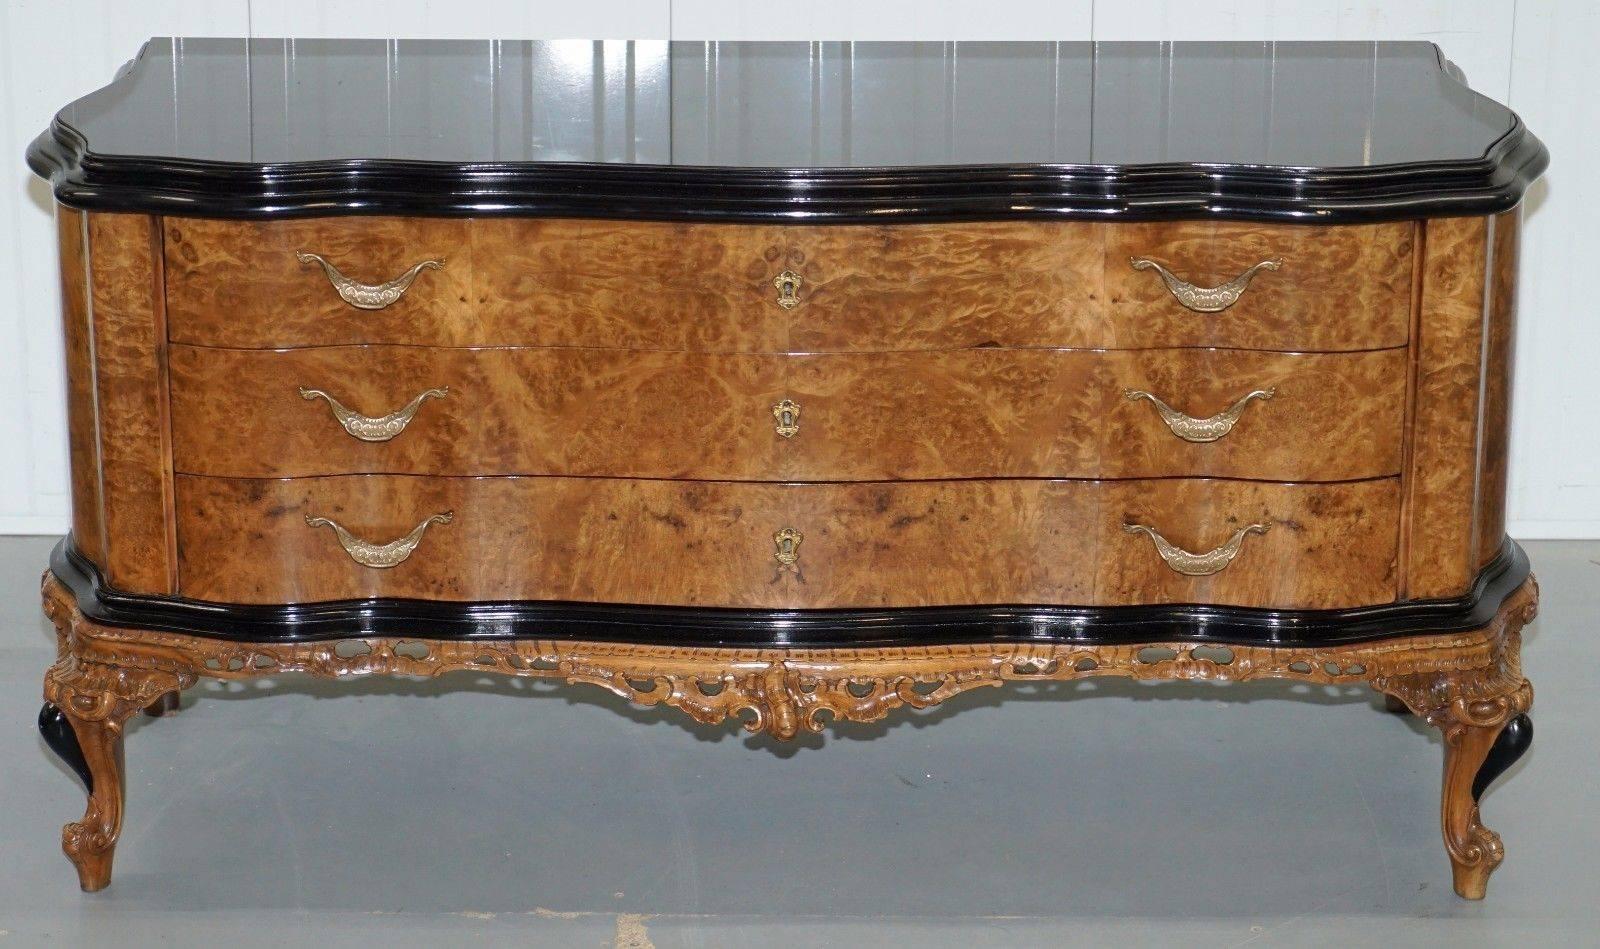 French Provincial Stunning Italian Walnut Serpentine Fronted Glass Topped Large Chest of Drawers